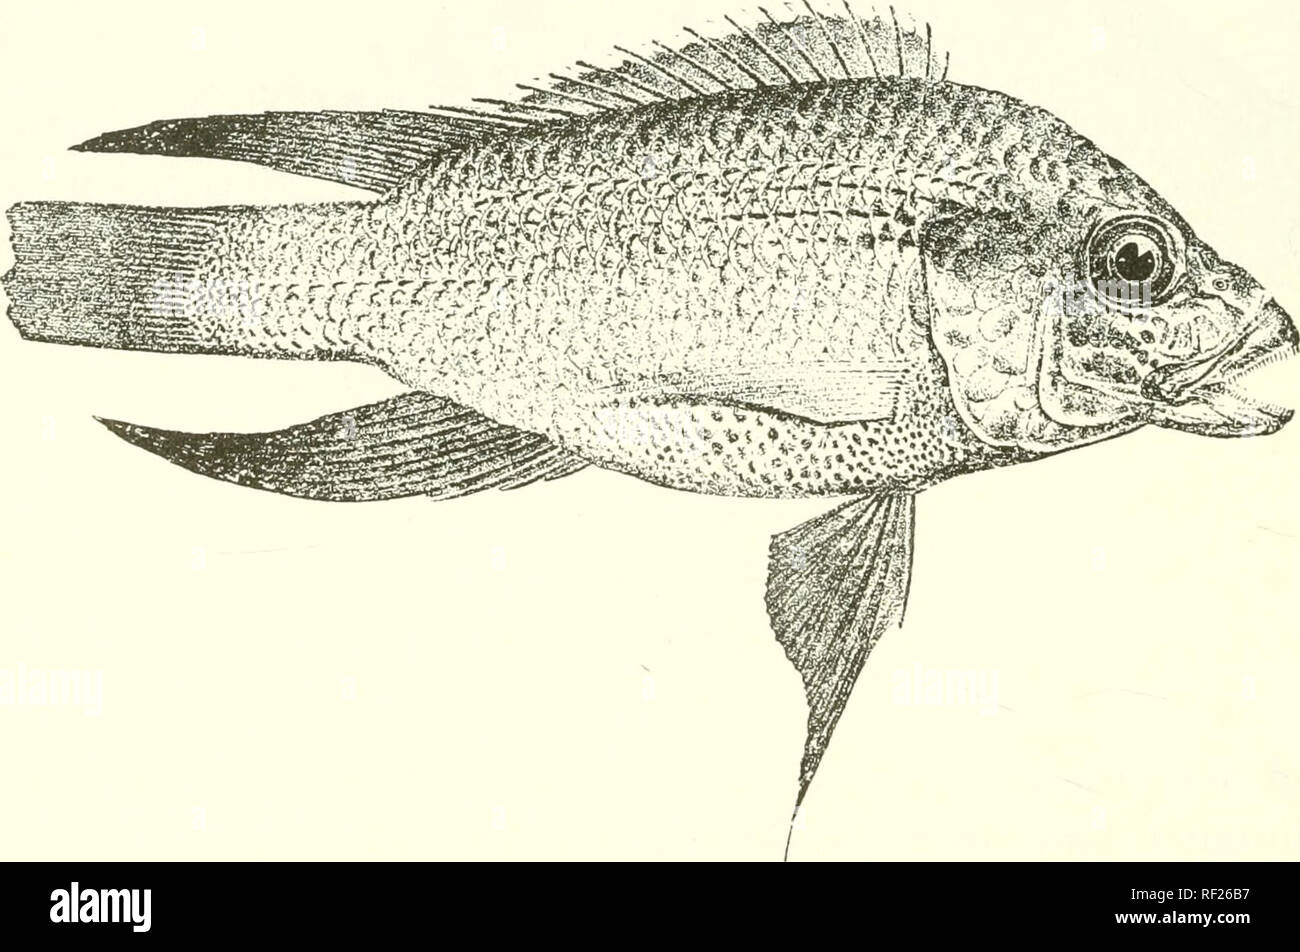 . Catalogue of the fresh-water fishes of Africa in the British Museum (Natural History). Fishes; Freshwater animals. 156 CICHLID.E. 30-33'^&quot;J; lateral lines jj^[-^. Brownish, olive, or blackish; vertical fins and ventrals blackish; dorsal and caudal edged with yellowish (red]). Total length 360 niillim. East Africa to Natal. Types in Berlin Museum. Sir J. Kirk (P.). Prof. VV. Peters (P.). Dr. Percy Kendall (C.) ; Sir h&quot; H. Johnston (P.). Dr. E. Wurren (P.). Mr. T. Ayres (C). Kev. N. Abraham (P.). 1-2. Ad. Zanzil)ar Coast. 3-4. Two of the Zanibesi. typos. 5. Ad. Ul)por Shire R. 6. Ad. Stock Photo